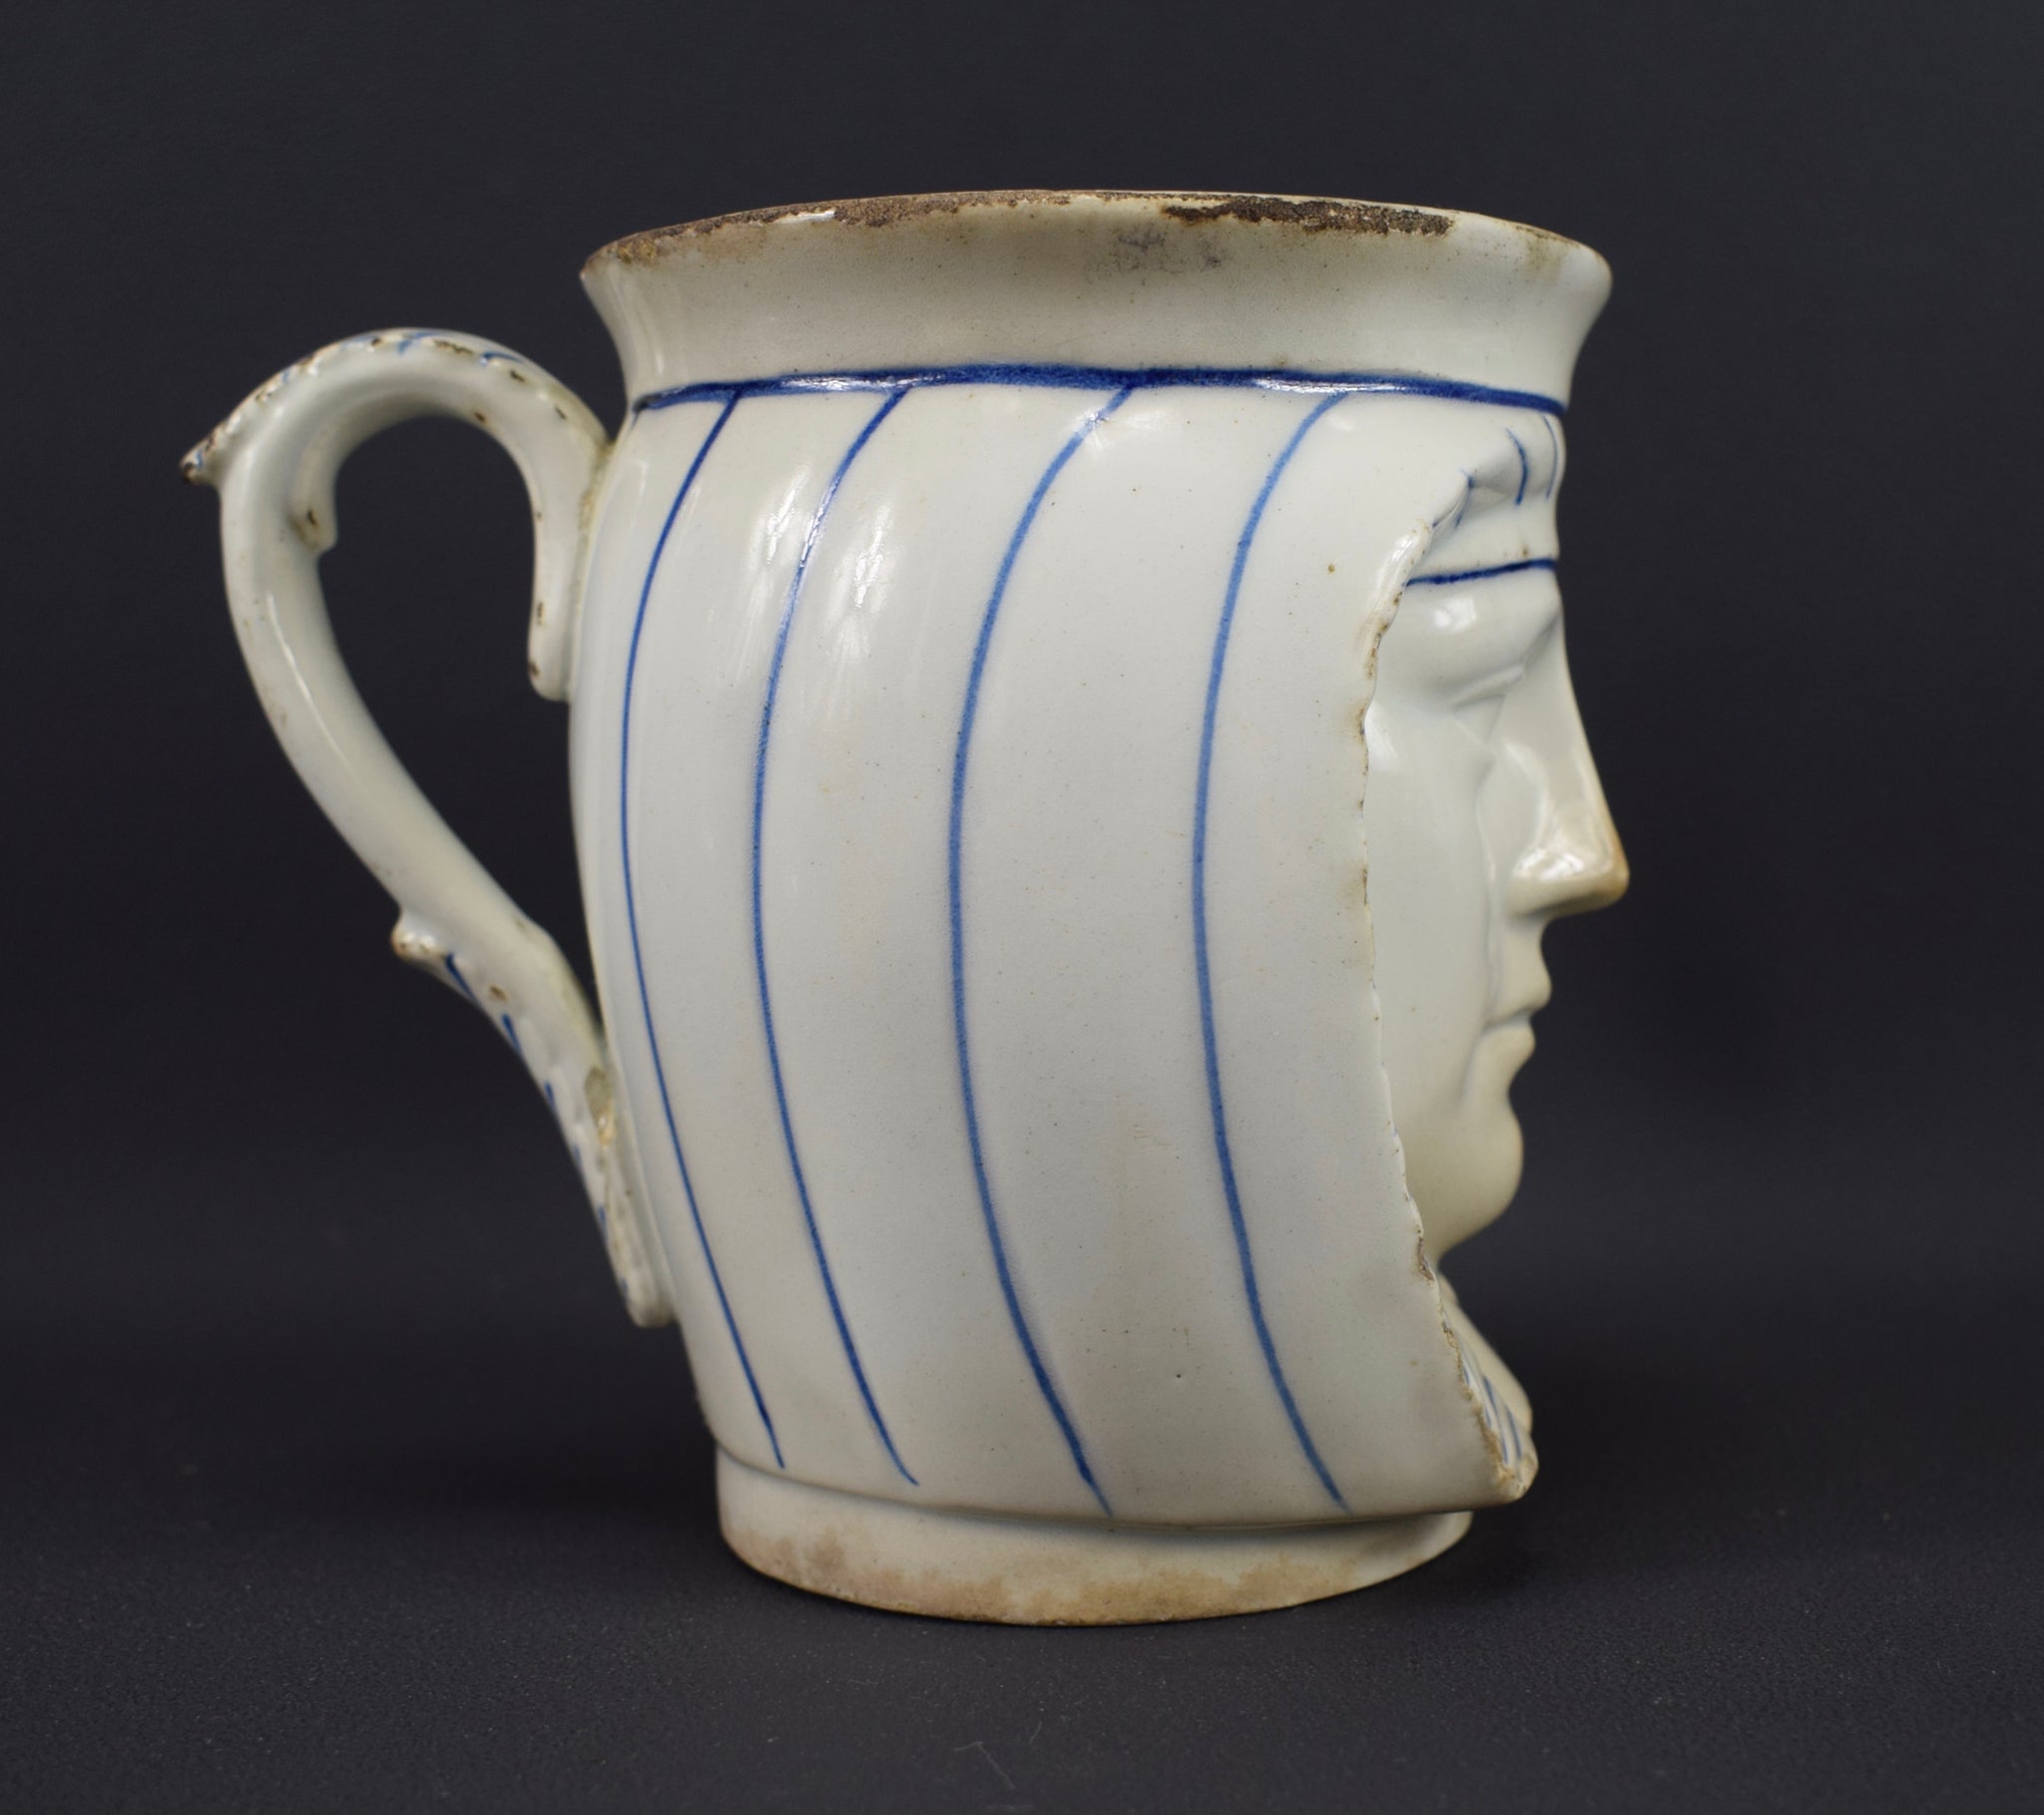 Antique Chocolate Cup Pharaoh - Charmantiques